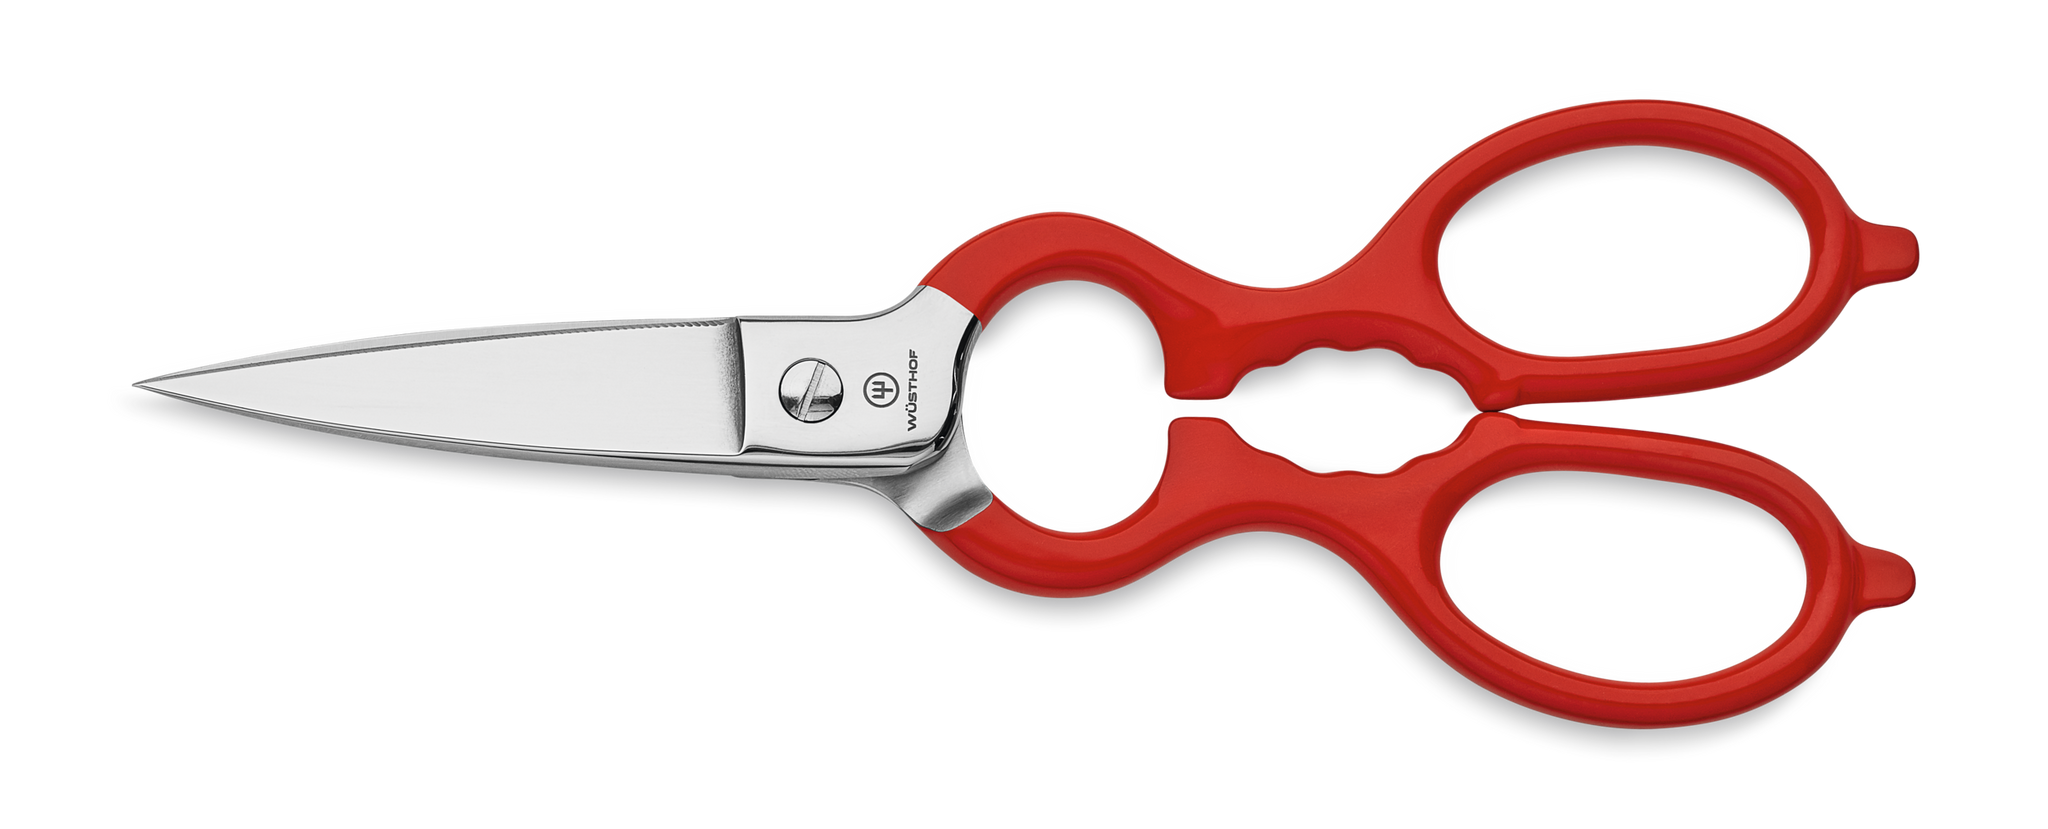 Stainless Kitchen Shears with Synthetic Grips